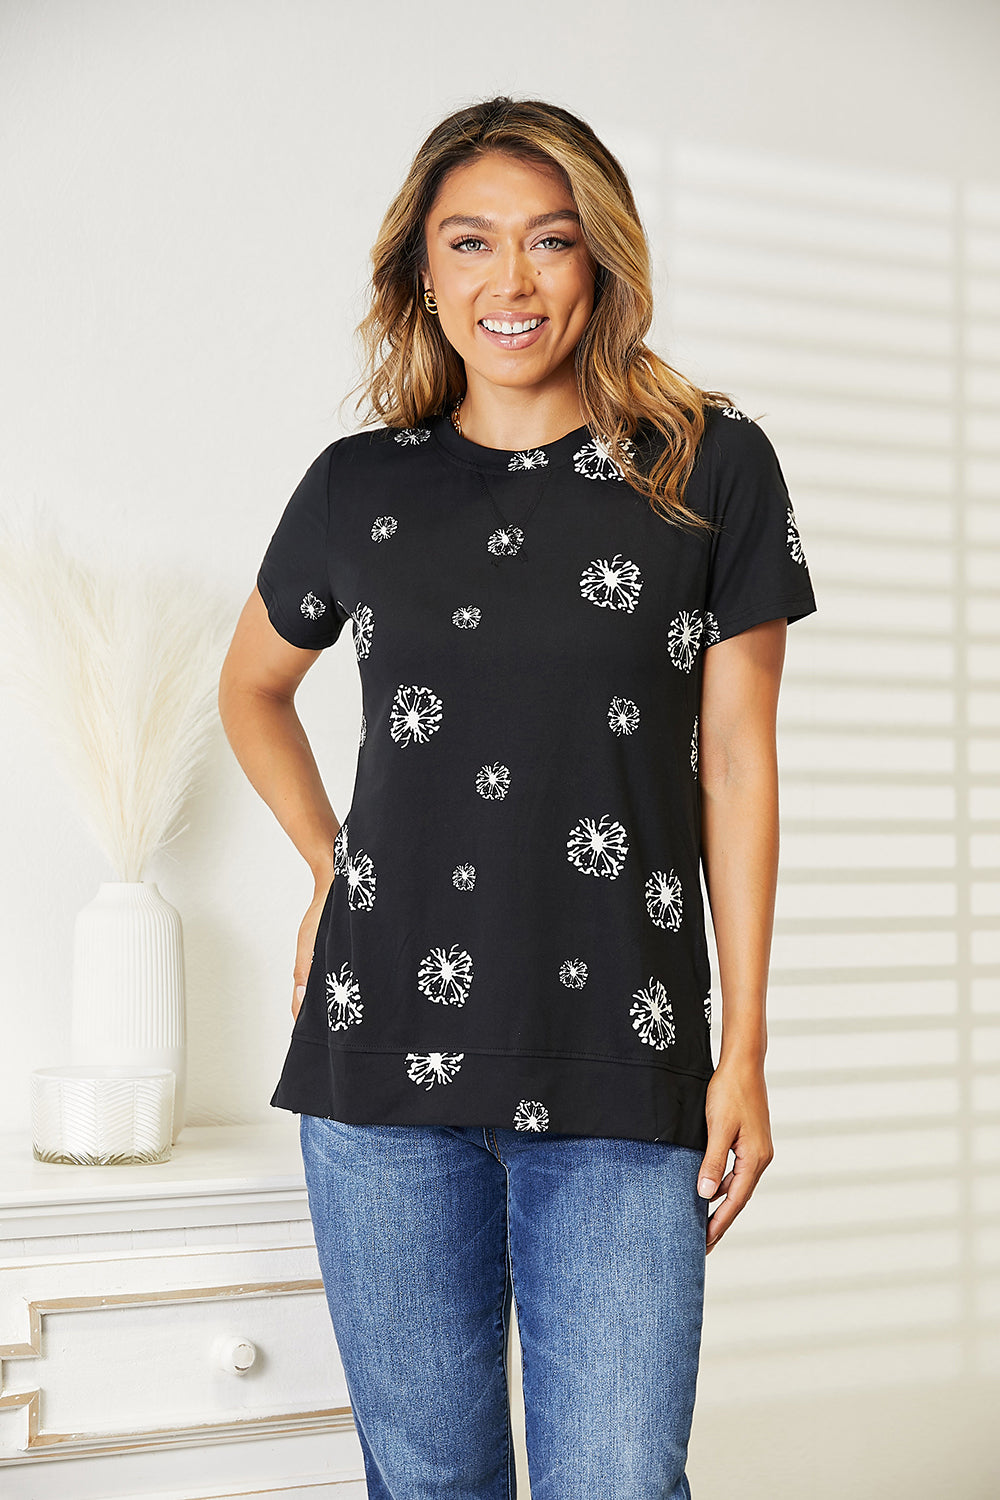 One On One Dandelion Print Round Neck T-Shirt Black Dandelion Printe T-Shirt by Vim&Vigor | Vim&Vigor Boutique